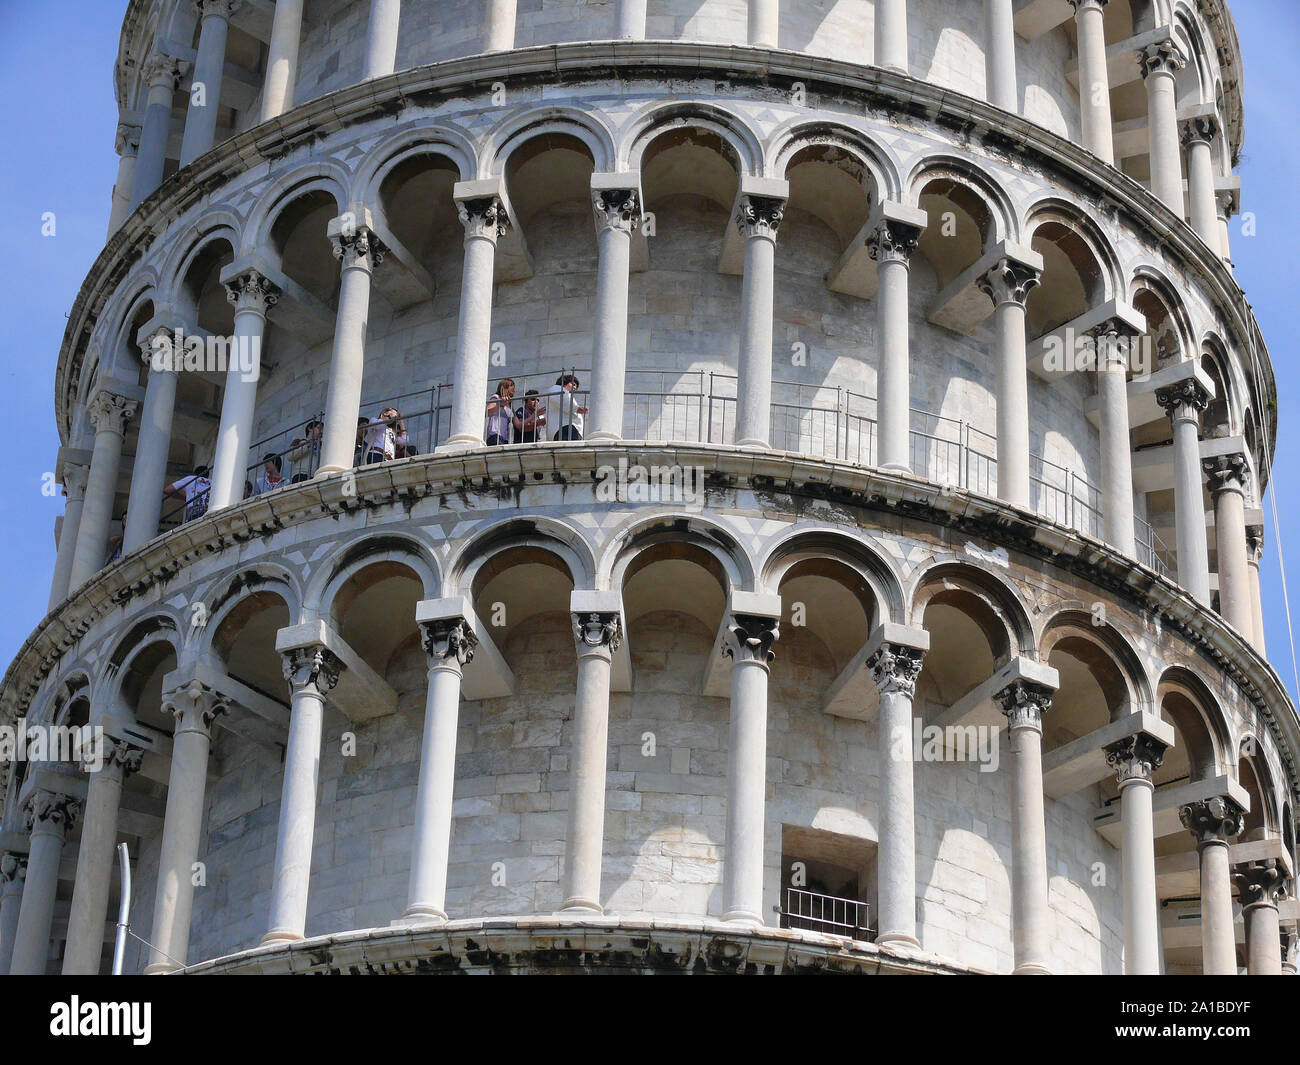 Leaning Tower of Pisa, Piazza dei Miracoli, Square of Miracles, Piazza del Duomo, Cathedral Square, Pisa, Tuscany, Italy, Europe, World Heritage Stock Photo